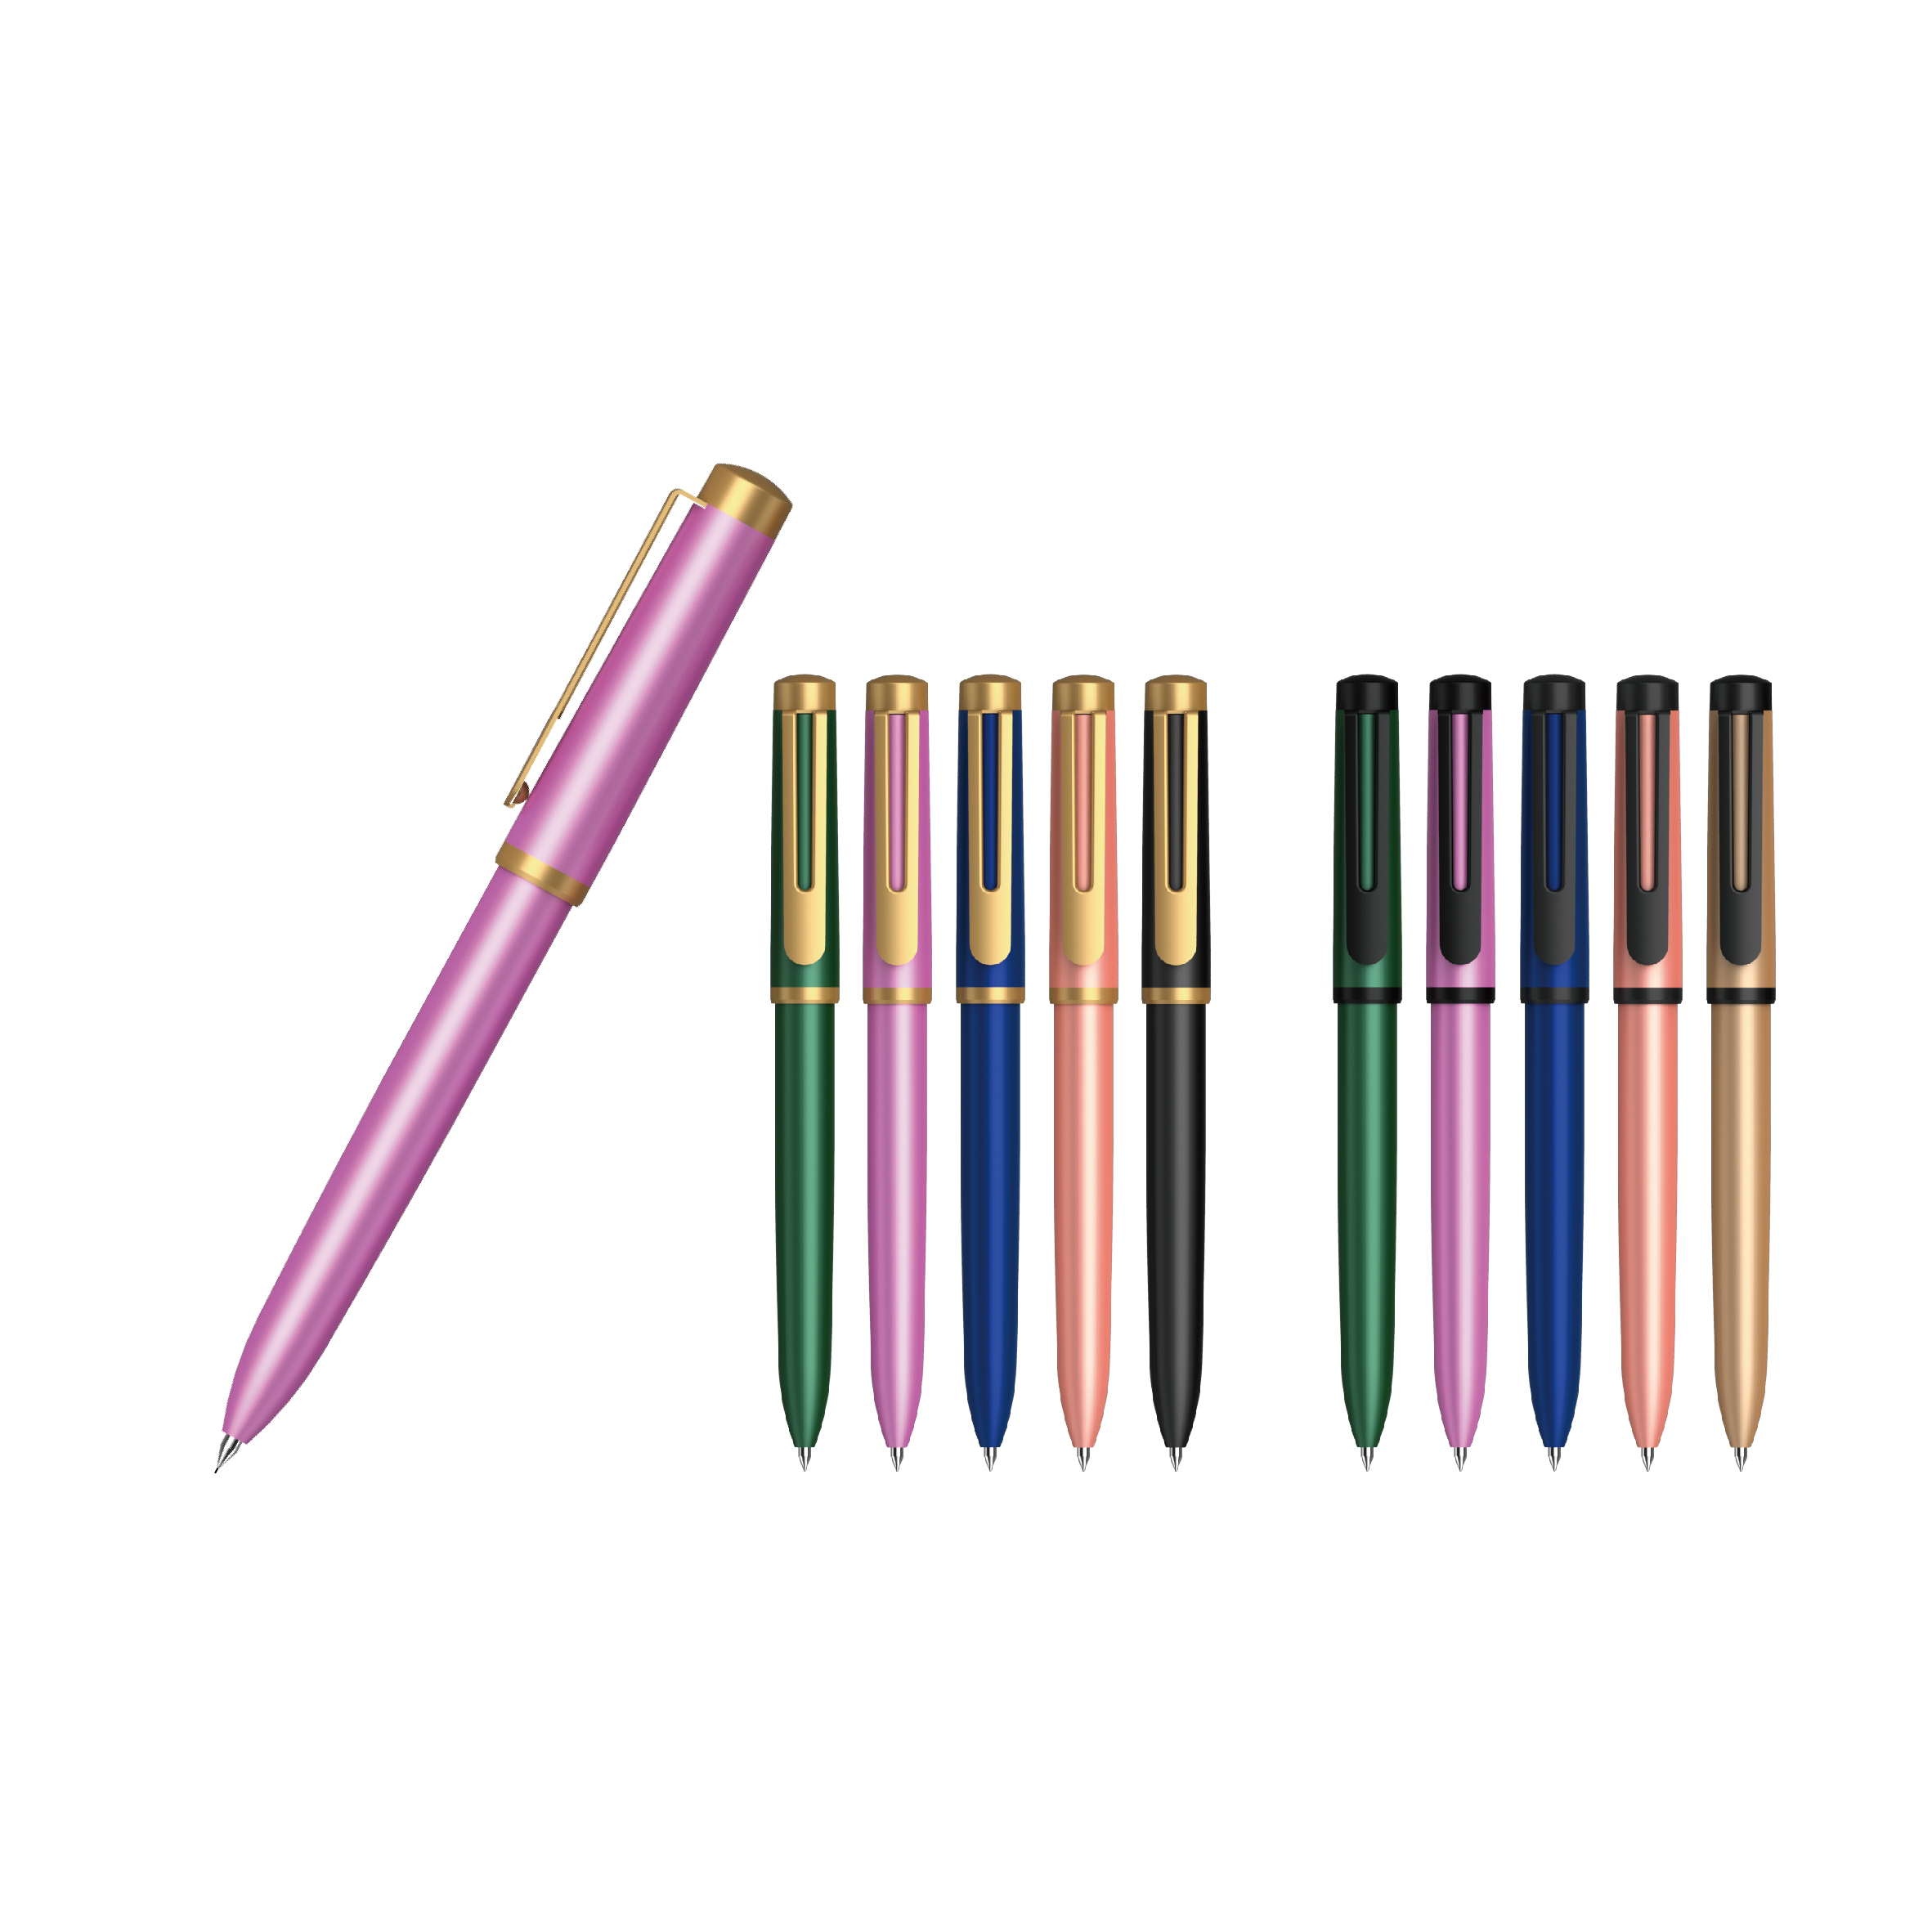 0.5/0.7mm Twistable Metal Pen with Pocket Clip for Business Office